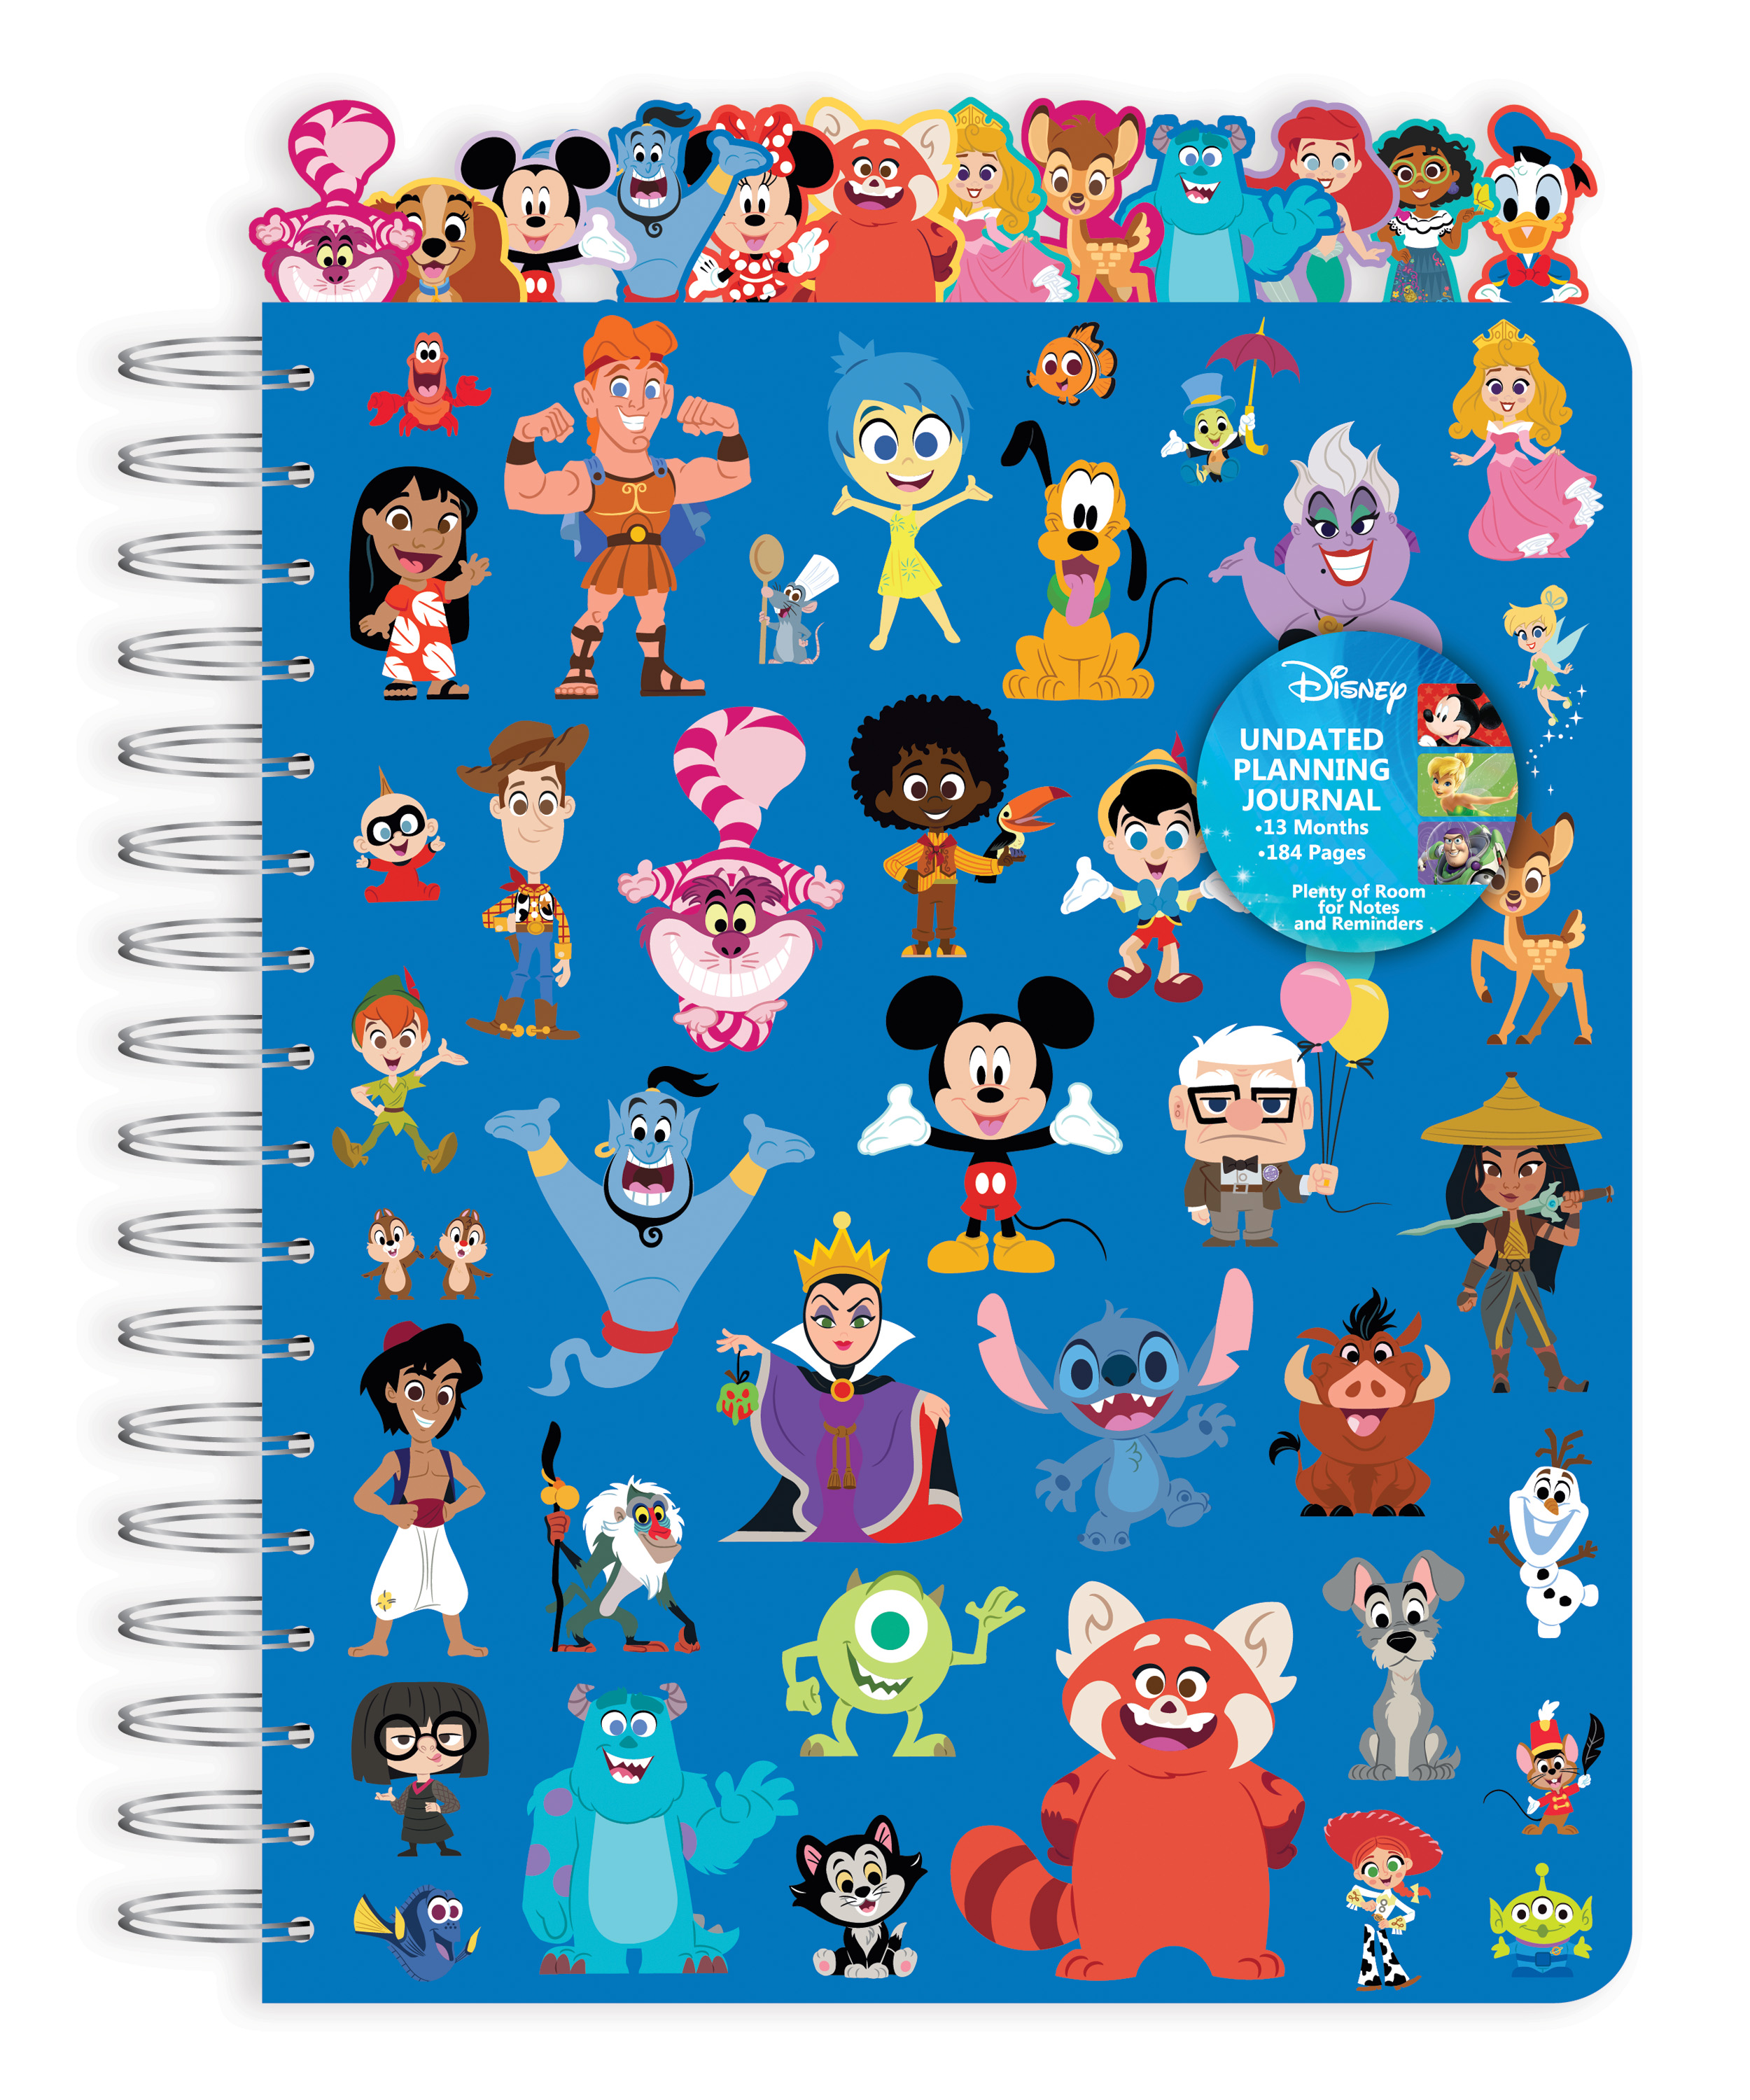 Disney 13-Month Undated Planner with Tabs, 184 Pages - image 1 of 8